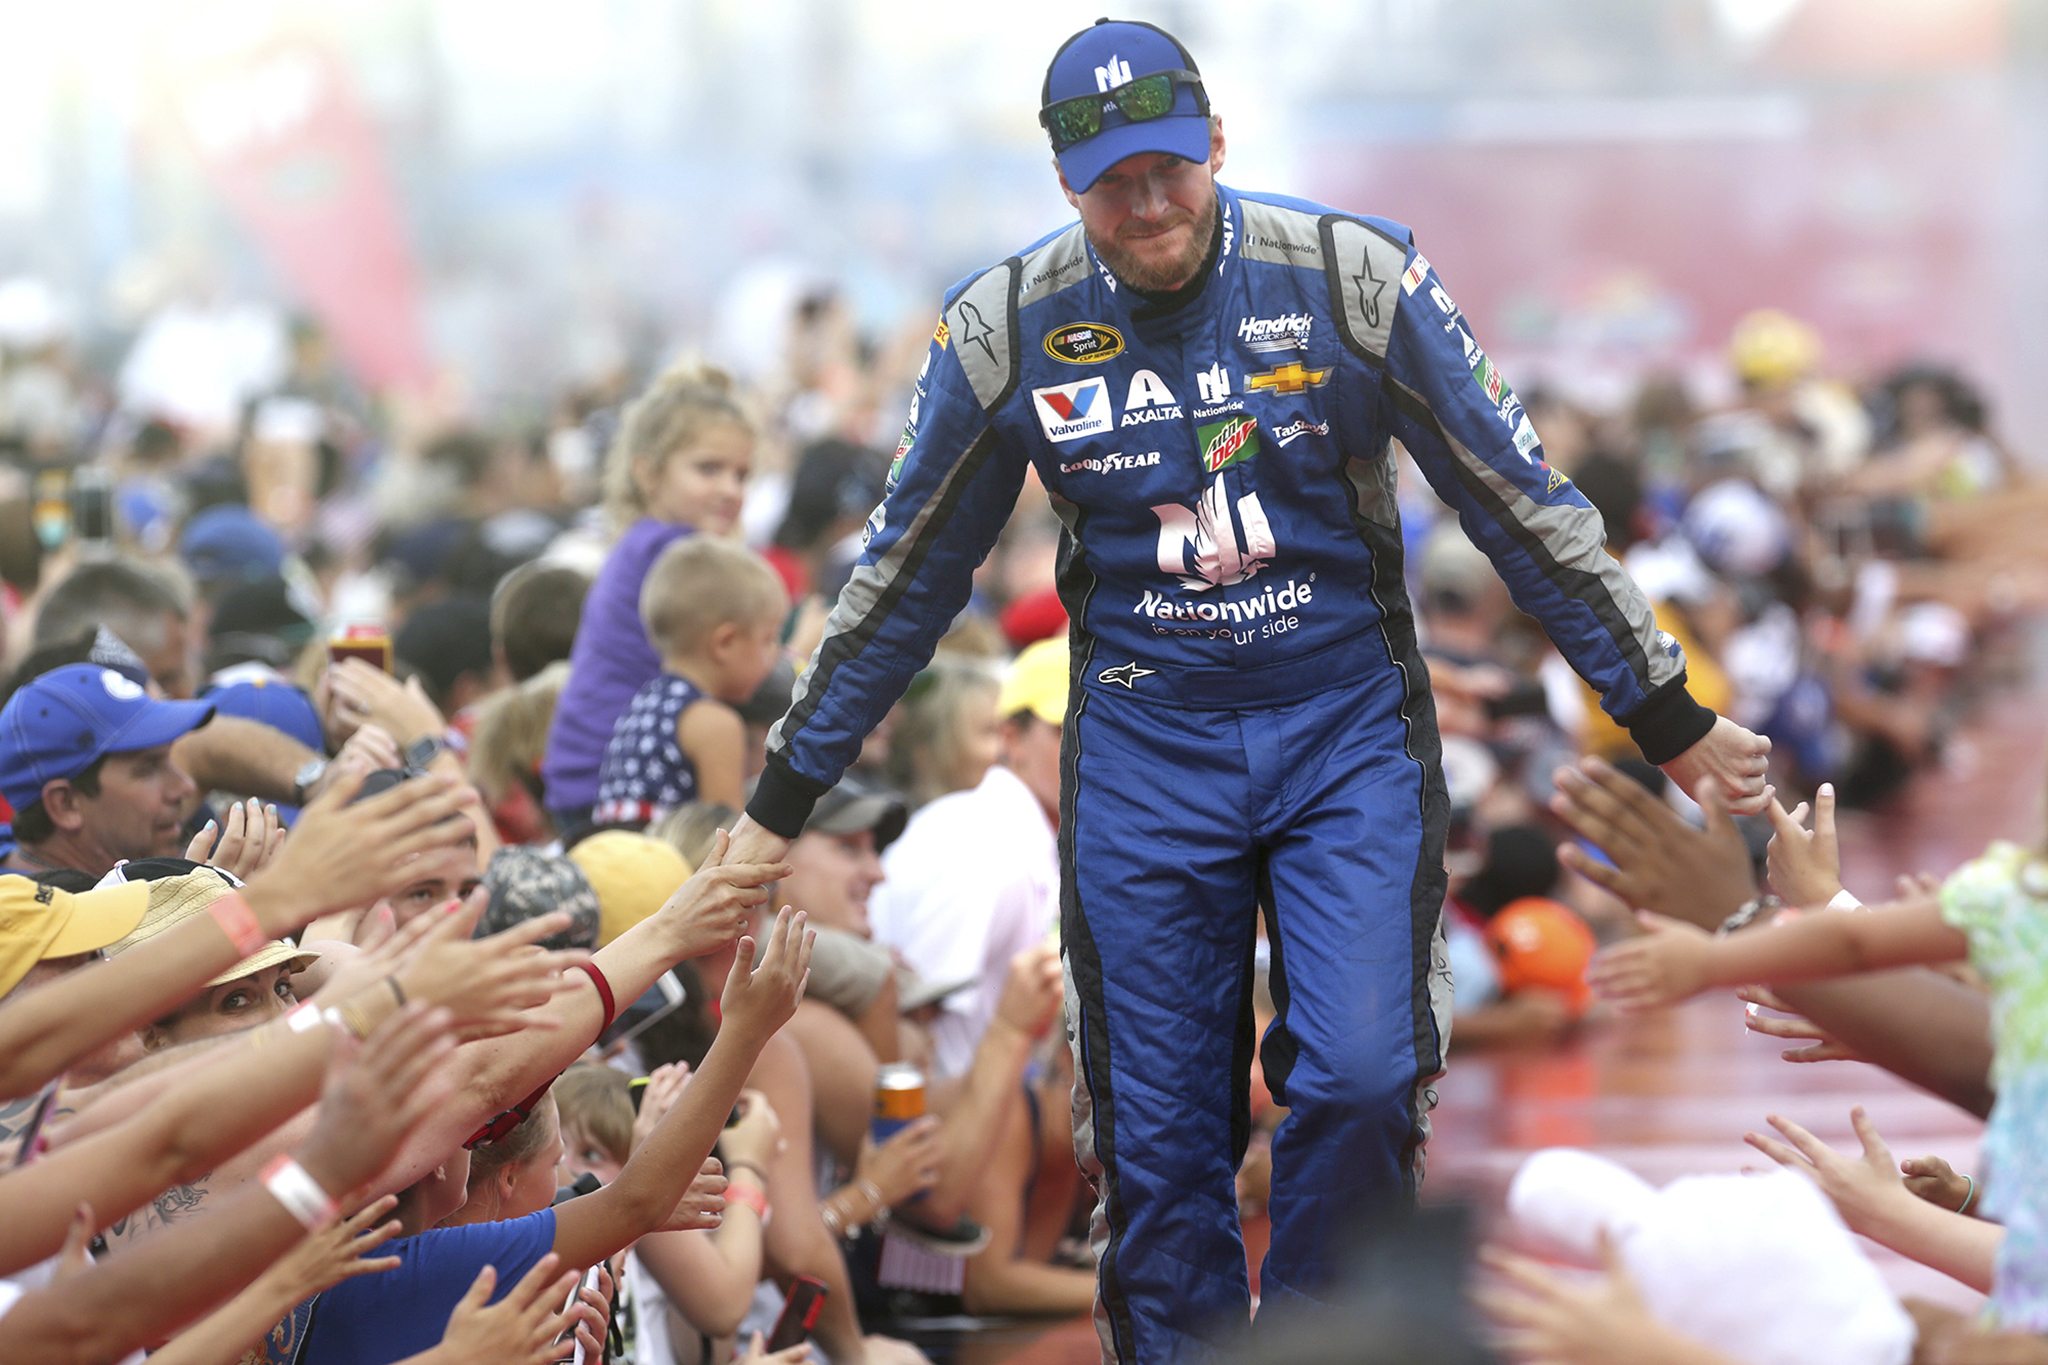 Dale Earnhardt Jr. to miss rest of NASCAR season because it’s ‘the right thing’